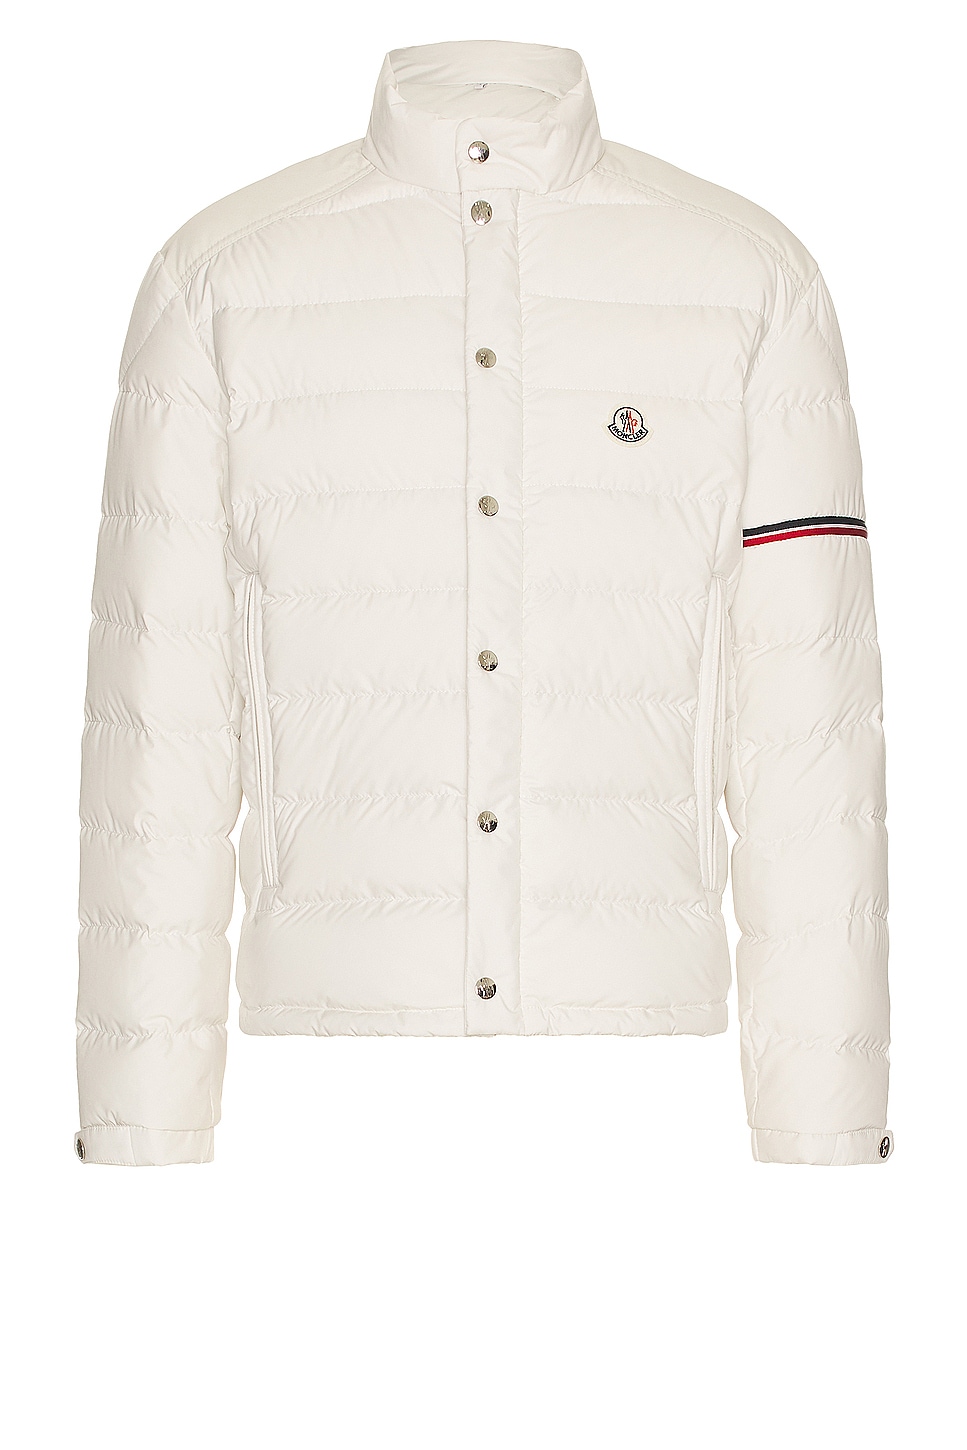 Image 1 of Moncler Colomb Jacket in Silk White